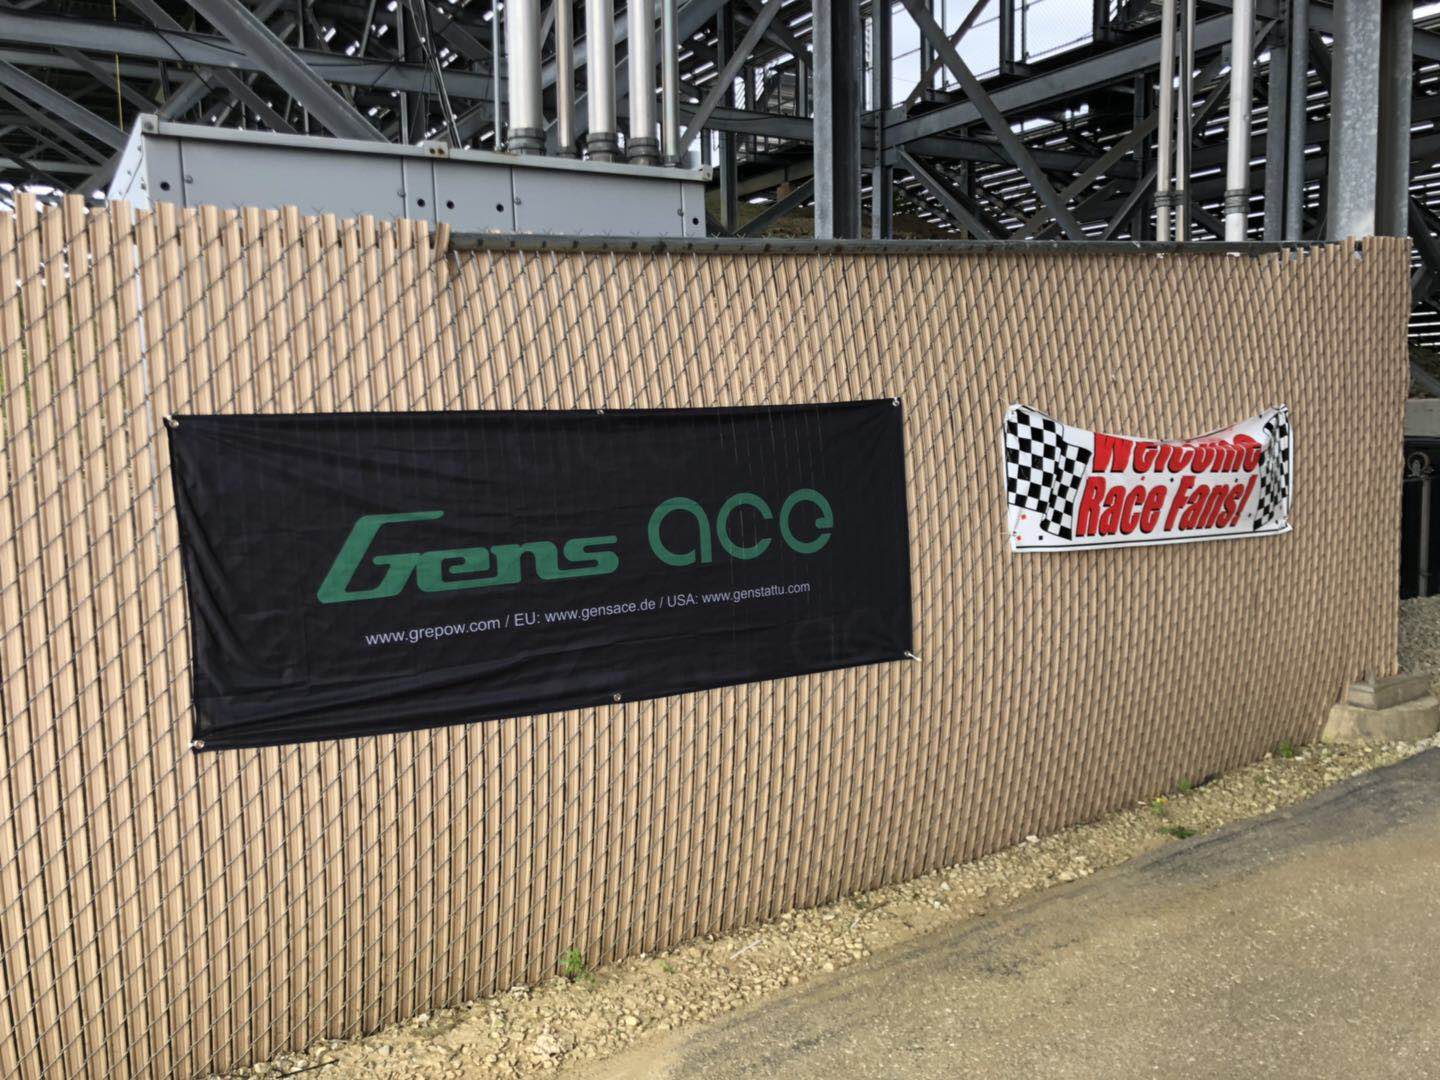 Gens ace is one of Grepow Brands